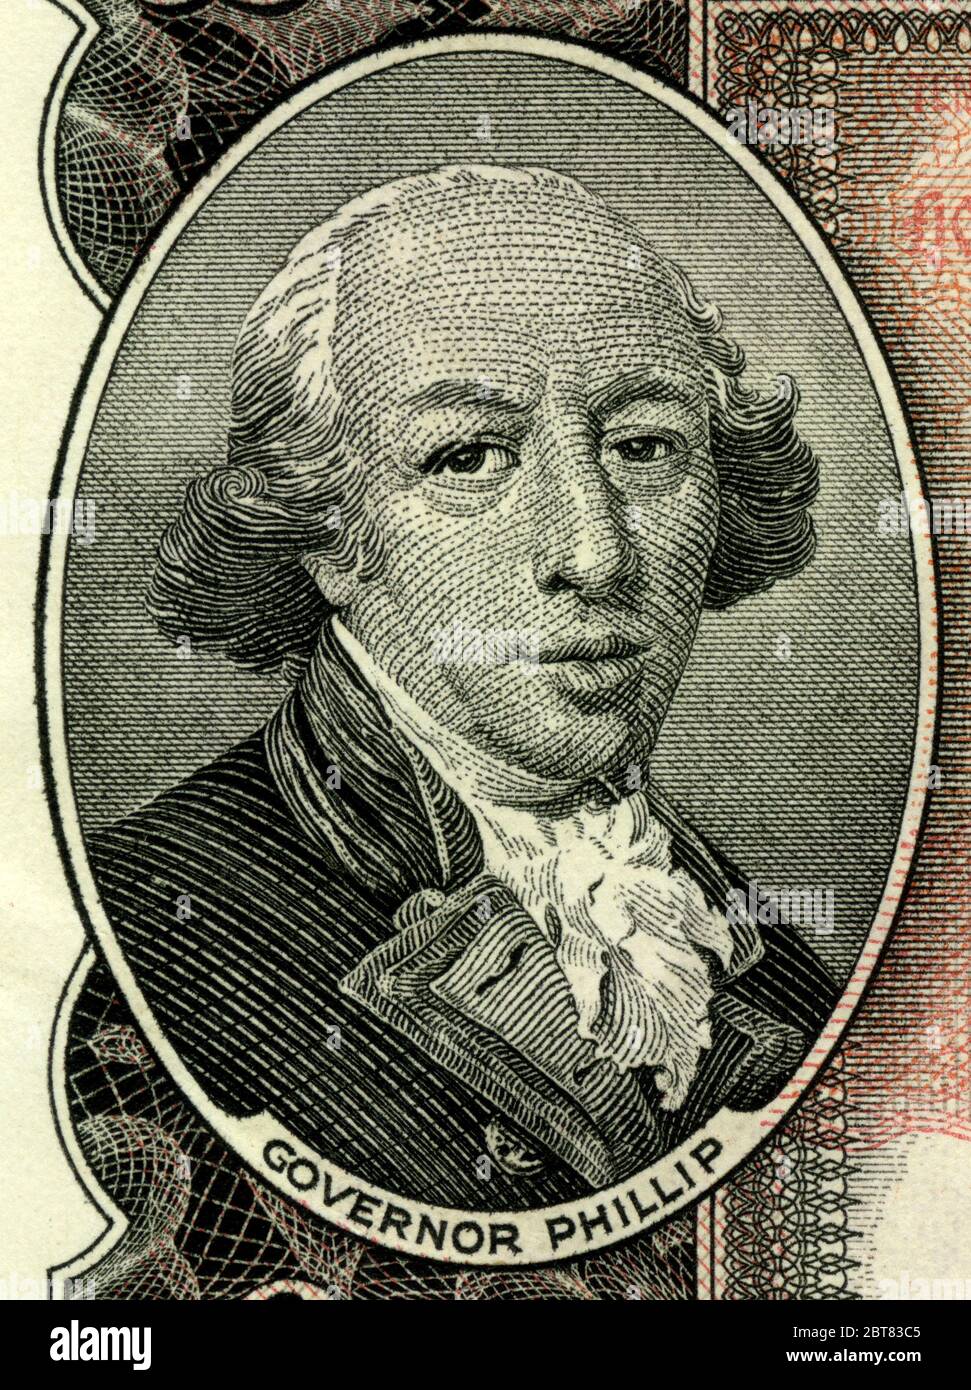 Portrait of Governor Phillip, featured on an Australian 10 pound bank note issued between 1954 and 1959 Stock Photo